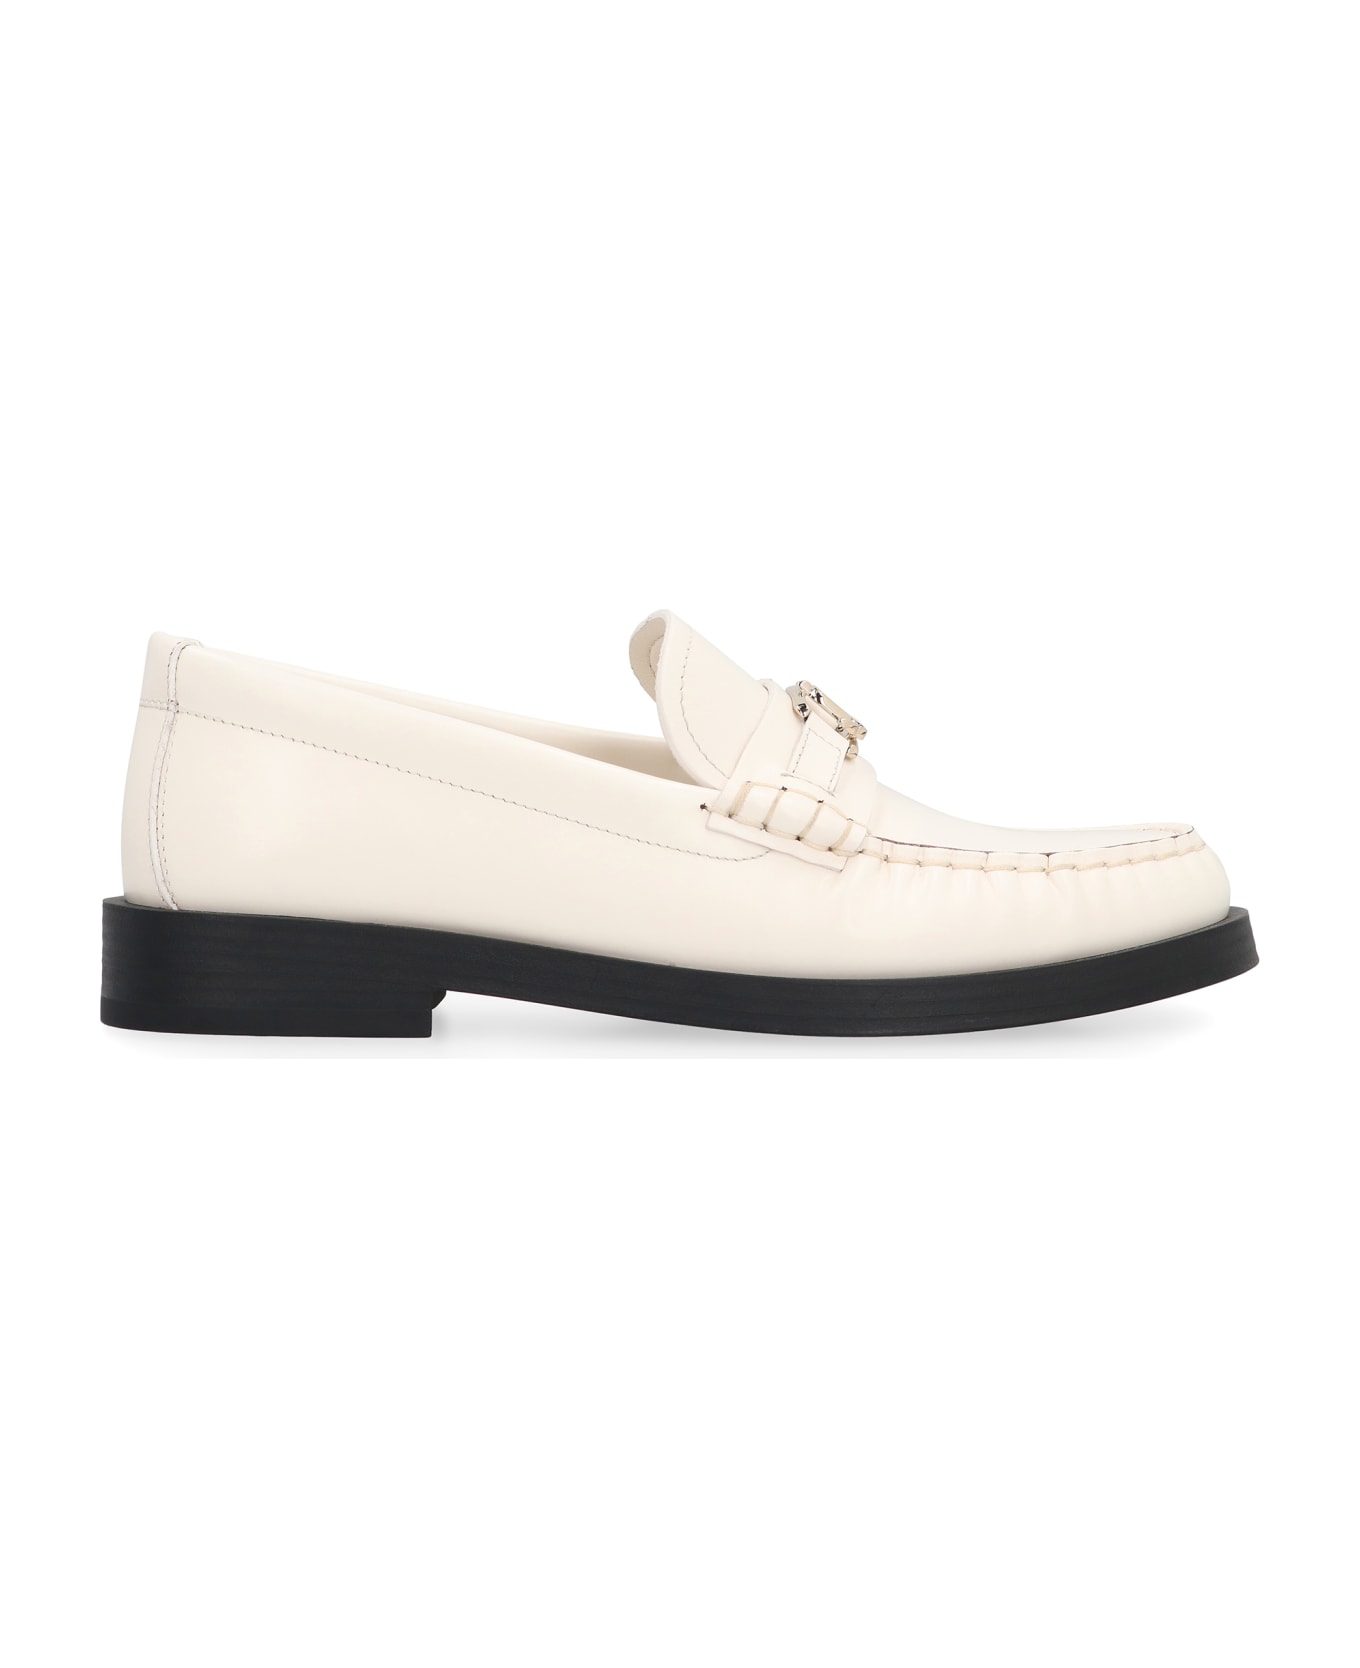 Jimmy Choo Addie Leather Loafers - White フラットシューズ